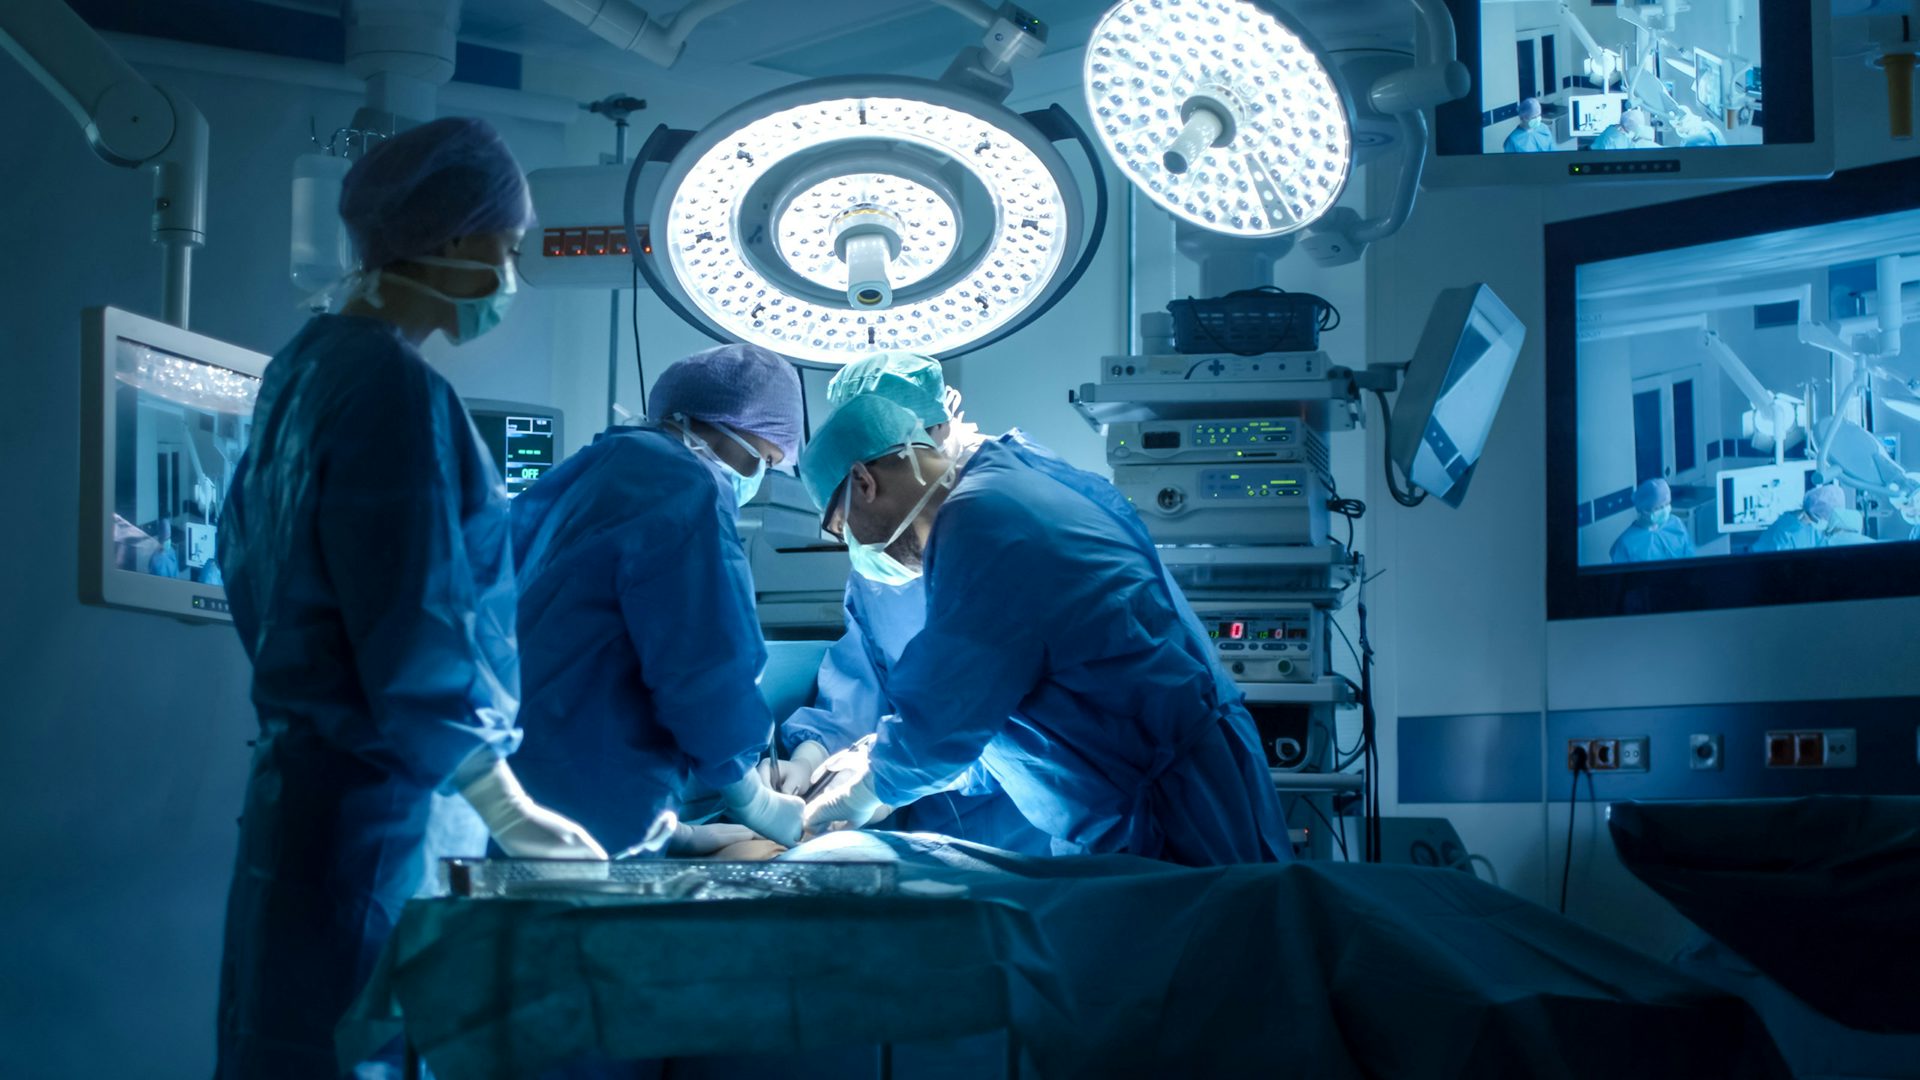 Surgeons performing surgery in an operating room: A team of skilled surgeons conducting a medical procedure in a sterile operating room.